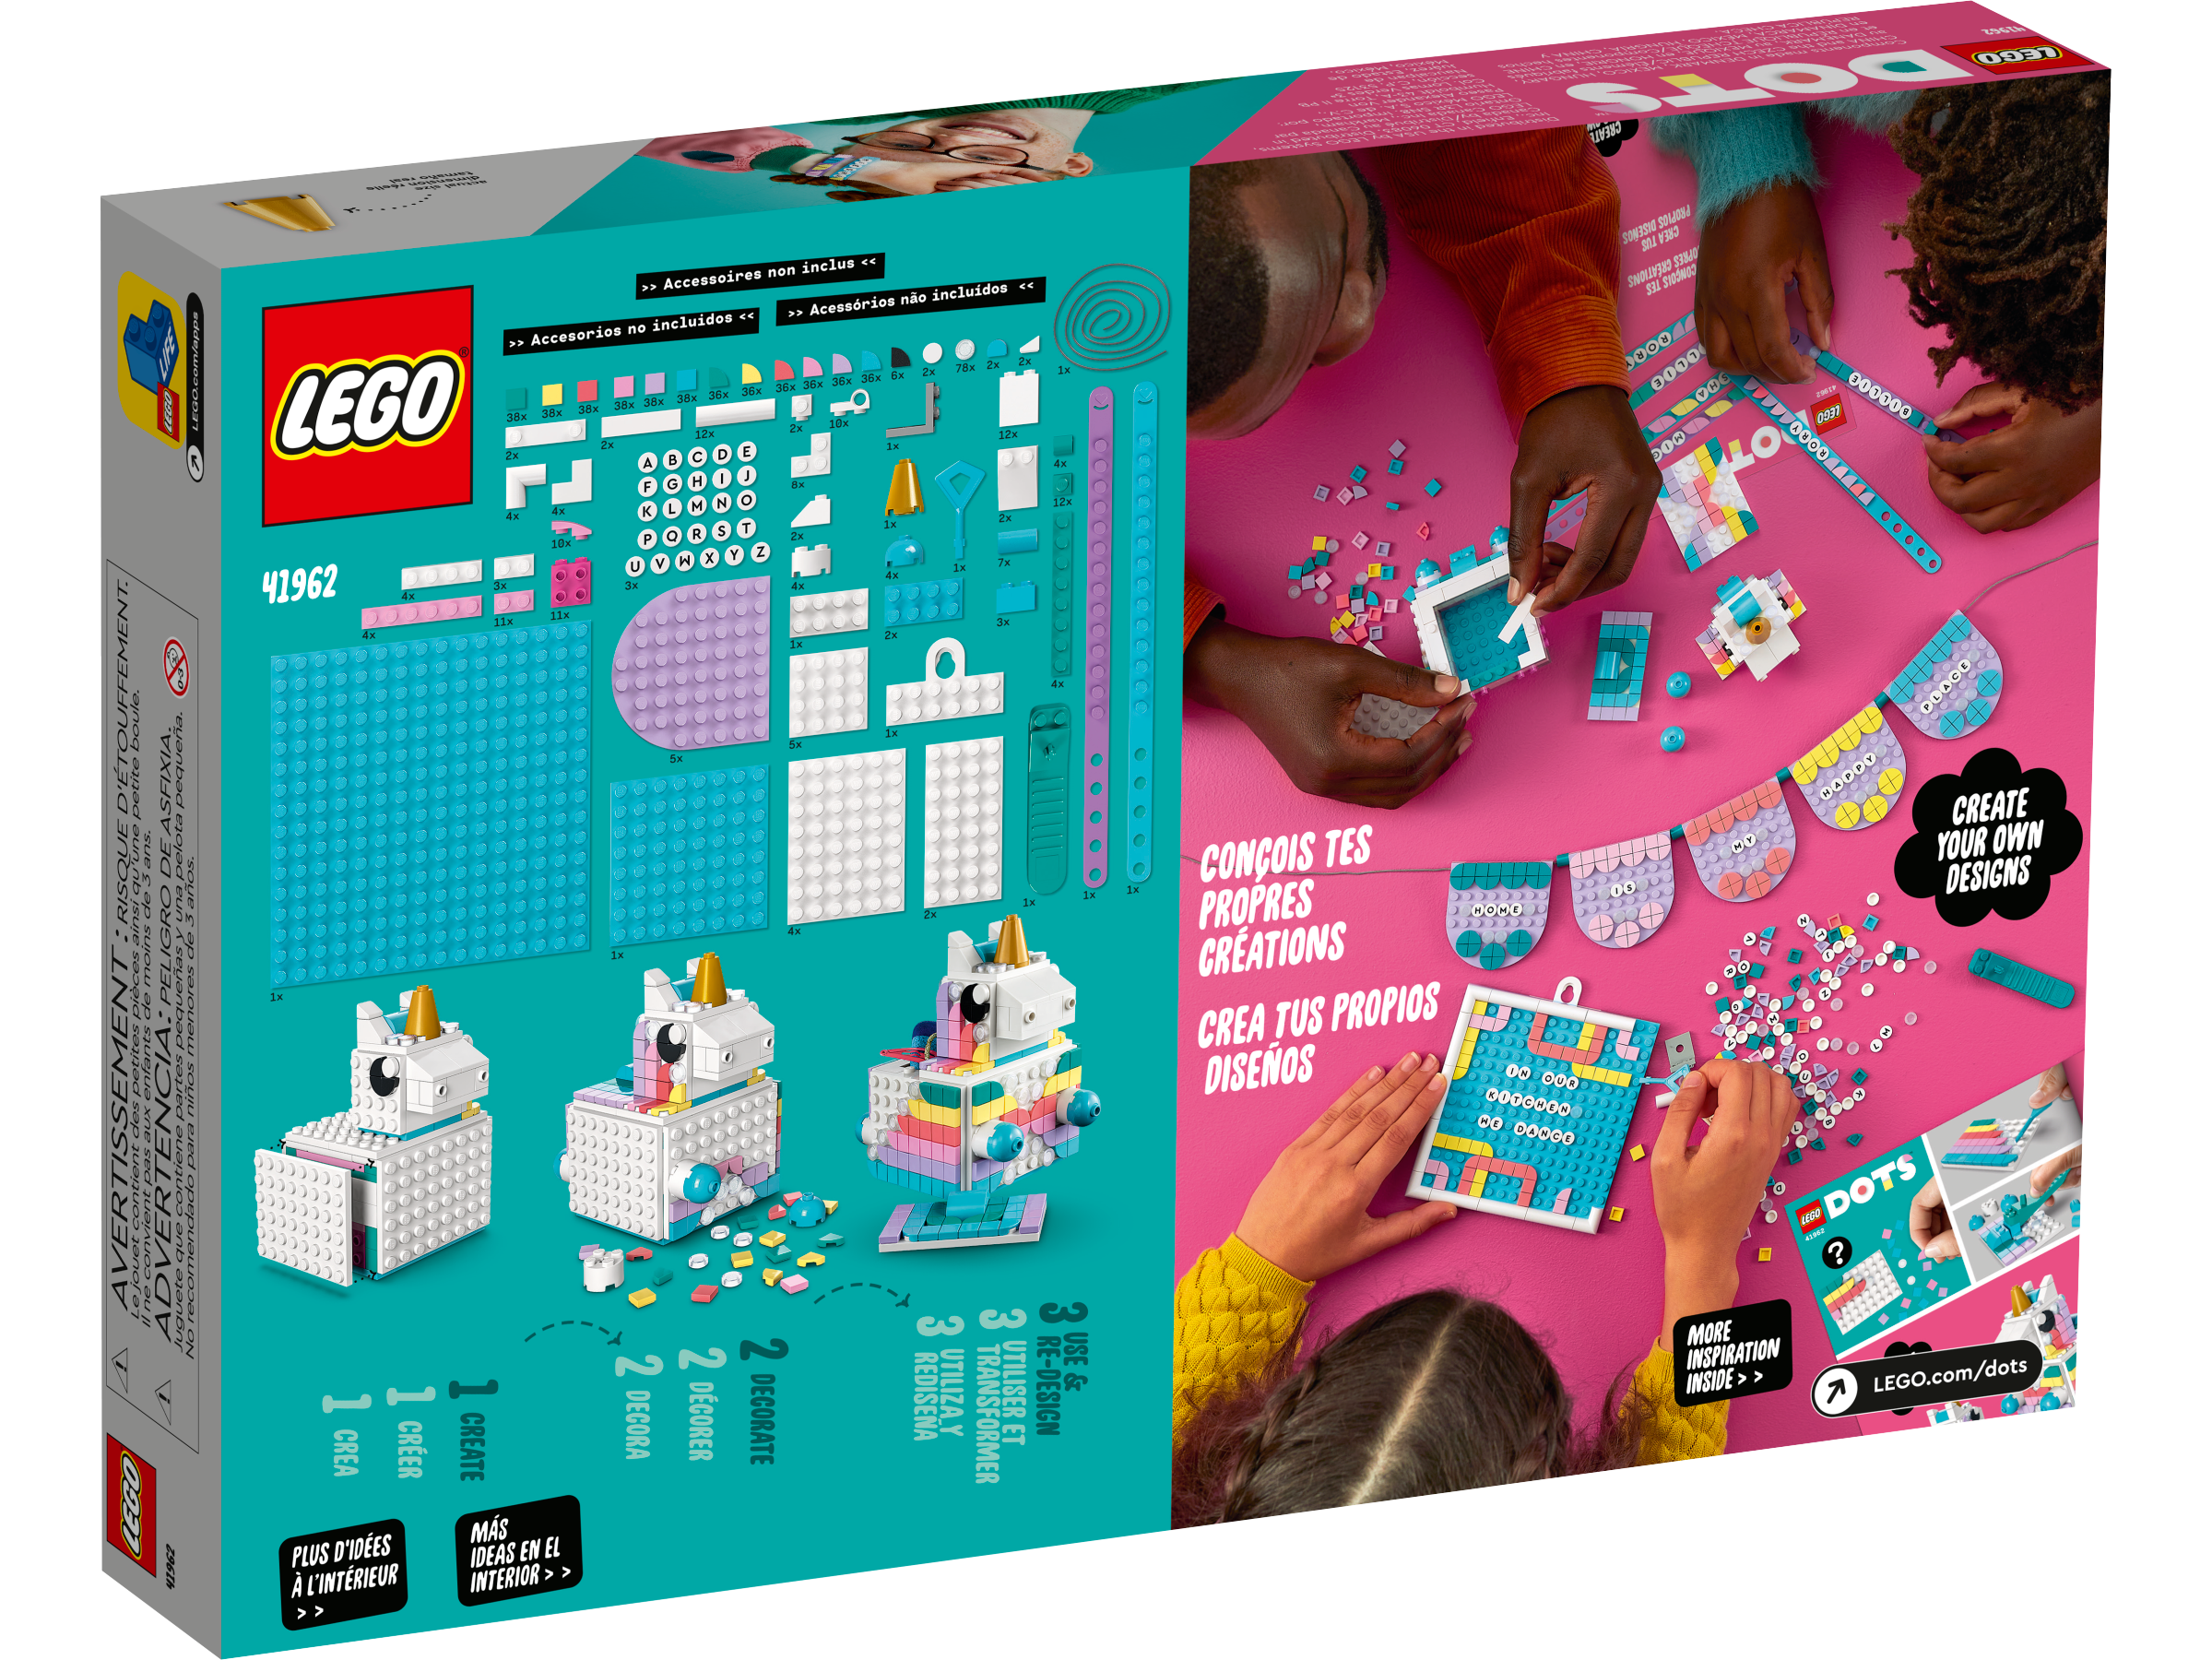 LEGO® | at 41962 Official Unicorn Shop Creative US online | Family DOTS the Buy Pack